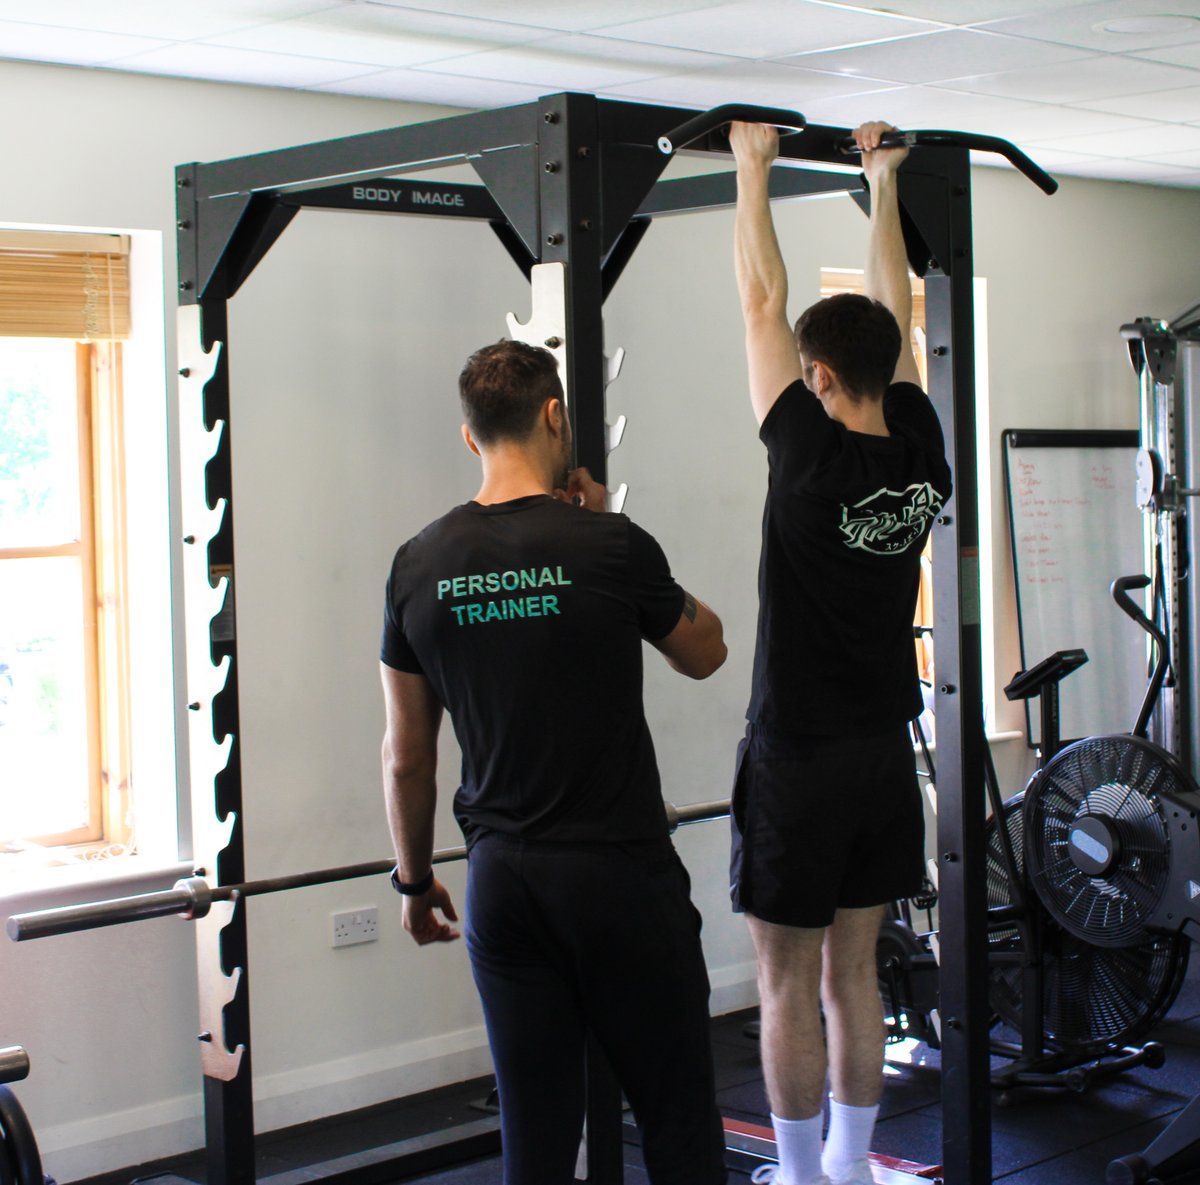 💪| Personal Training Tailored fitness plans for your unique journey. Our personal trainers at Fota Island Fitness customise coaching to your body, goals, and expertise. 🏋️‍♂️✨ Learn more fotaisland.ie/fota-fitness/ #fotaislandfitness #ptcork #cork